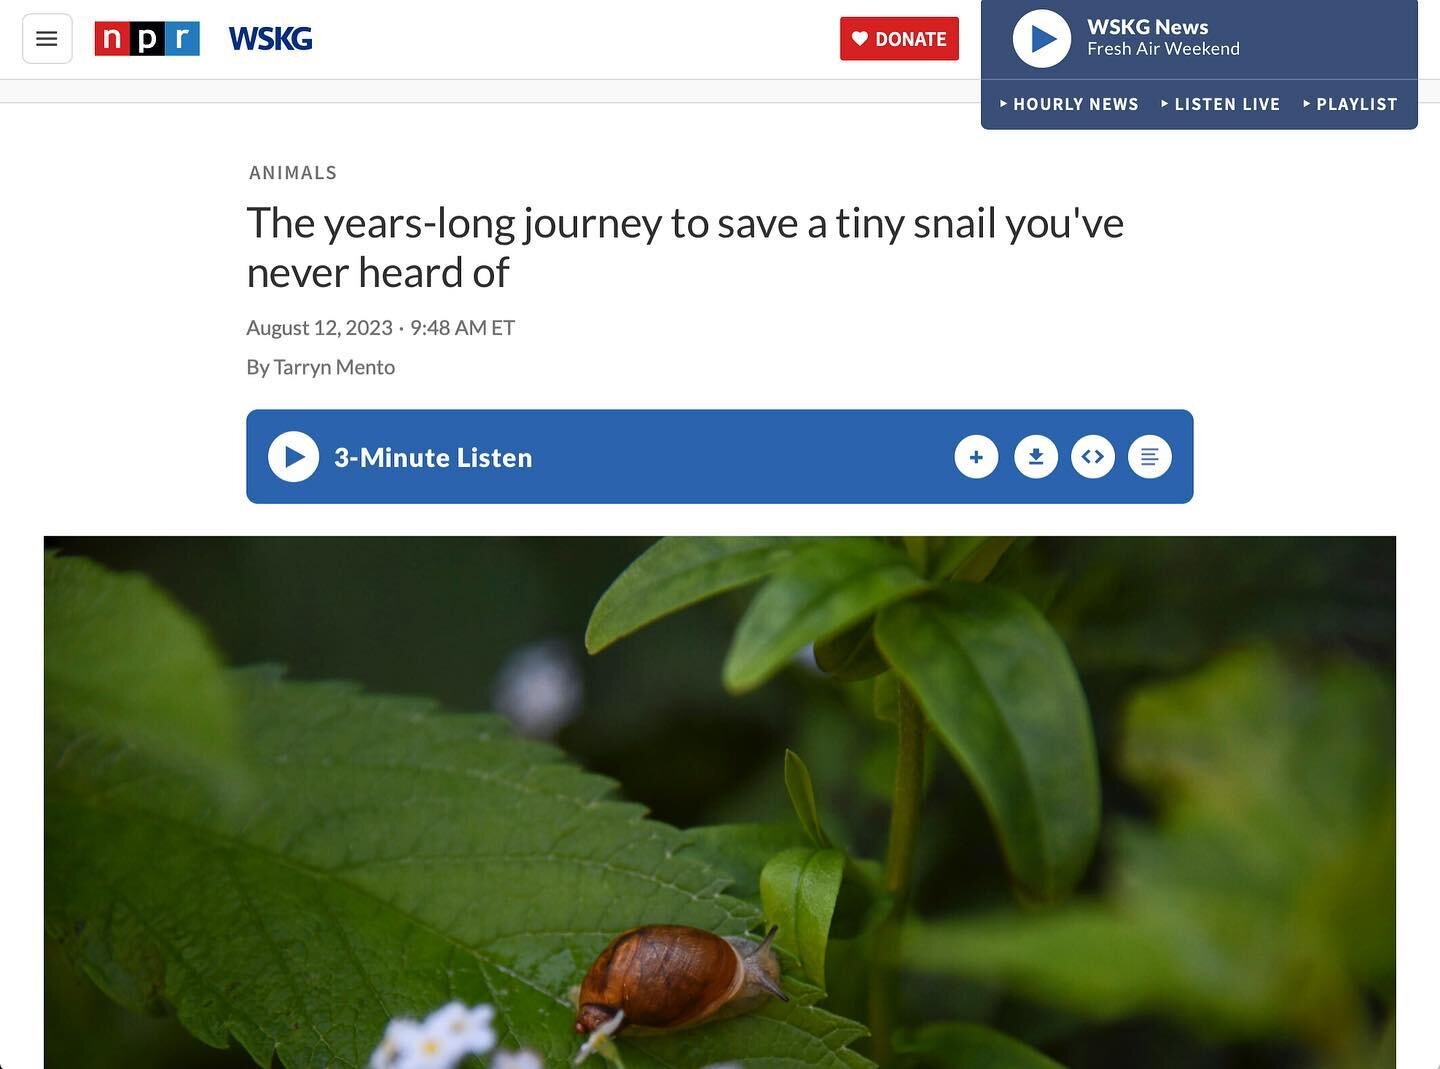 &ldquo;The years-long journey to save a tiny snail you&rsquo;ve never heard of&rdquo; @npr - Excited to share more images of my long-term project about Chittenango ovate amber snails, an endangered and endemic species to upstate New York (link in bio